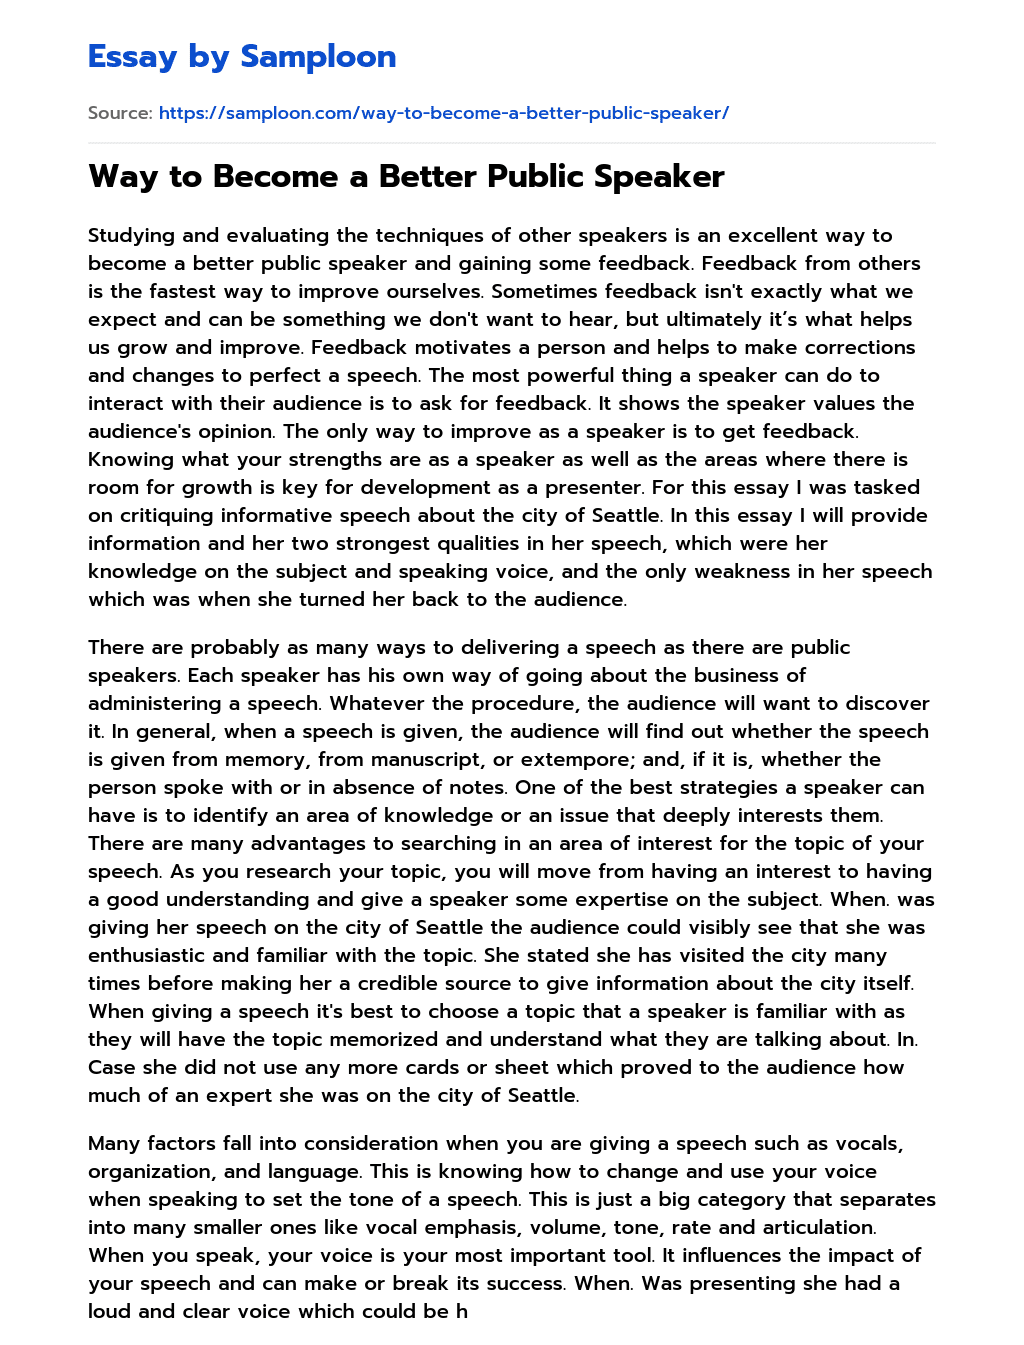 Way to Become a Better Public Speaker essay